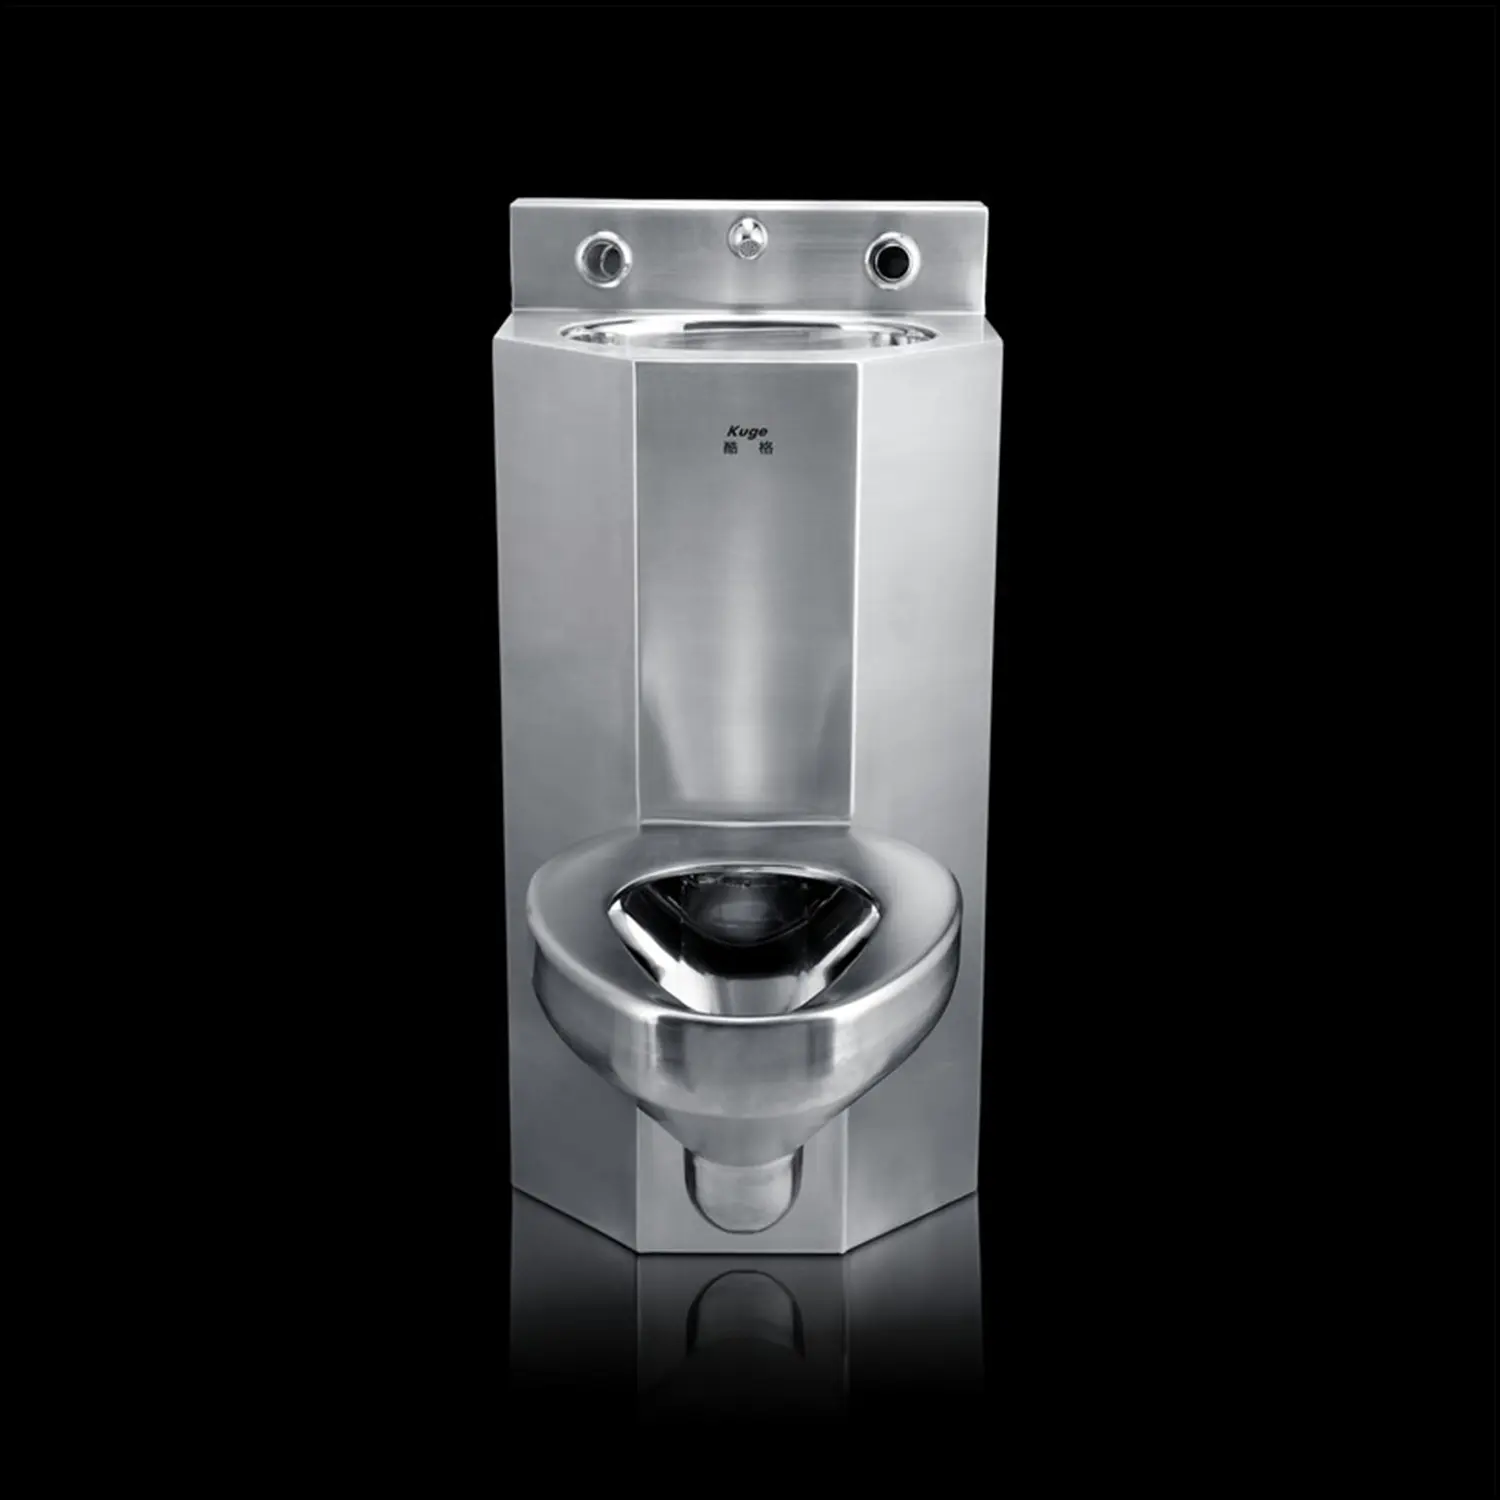 Heavy Construction Robust Metal Toilet Prison Jail Detention Stainless Steel Toilet Bowl